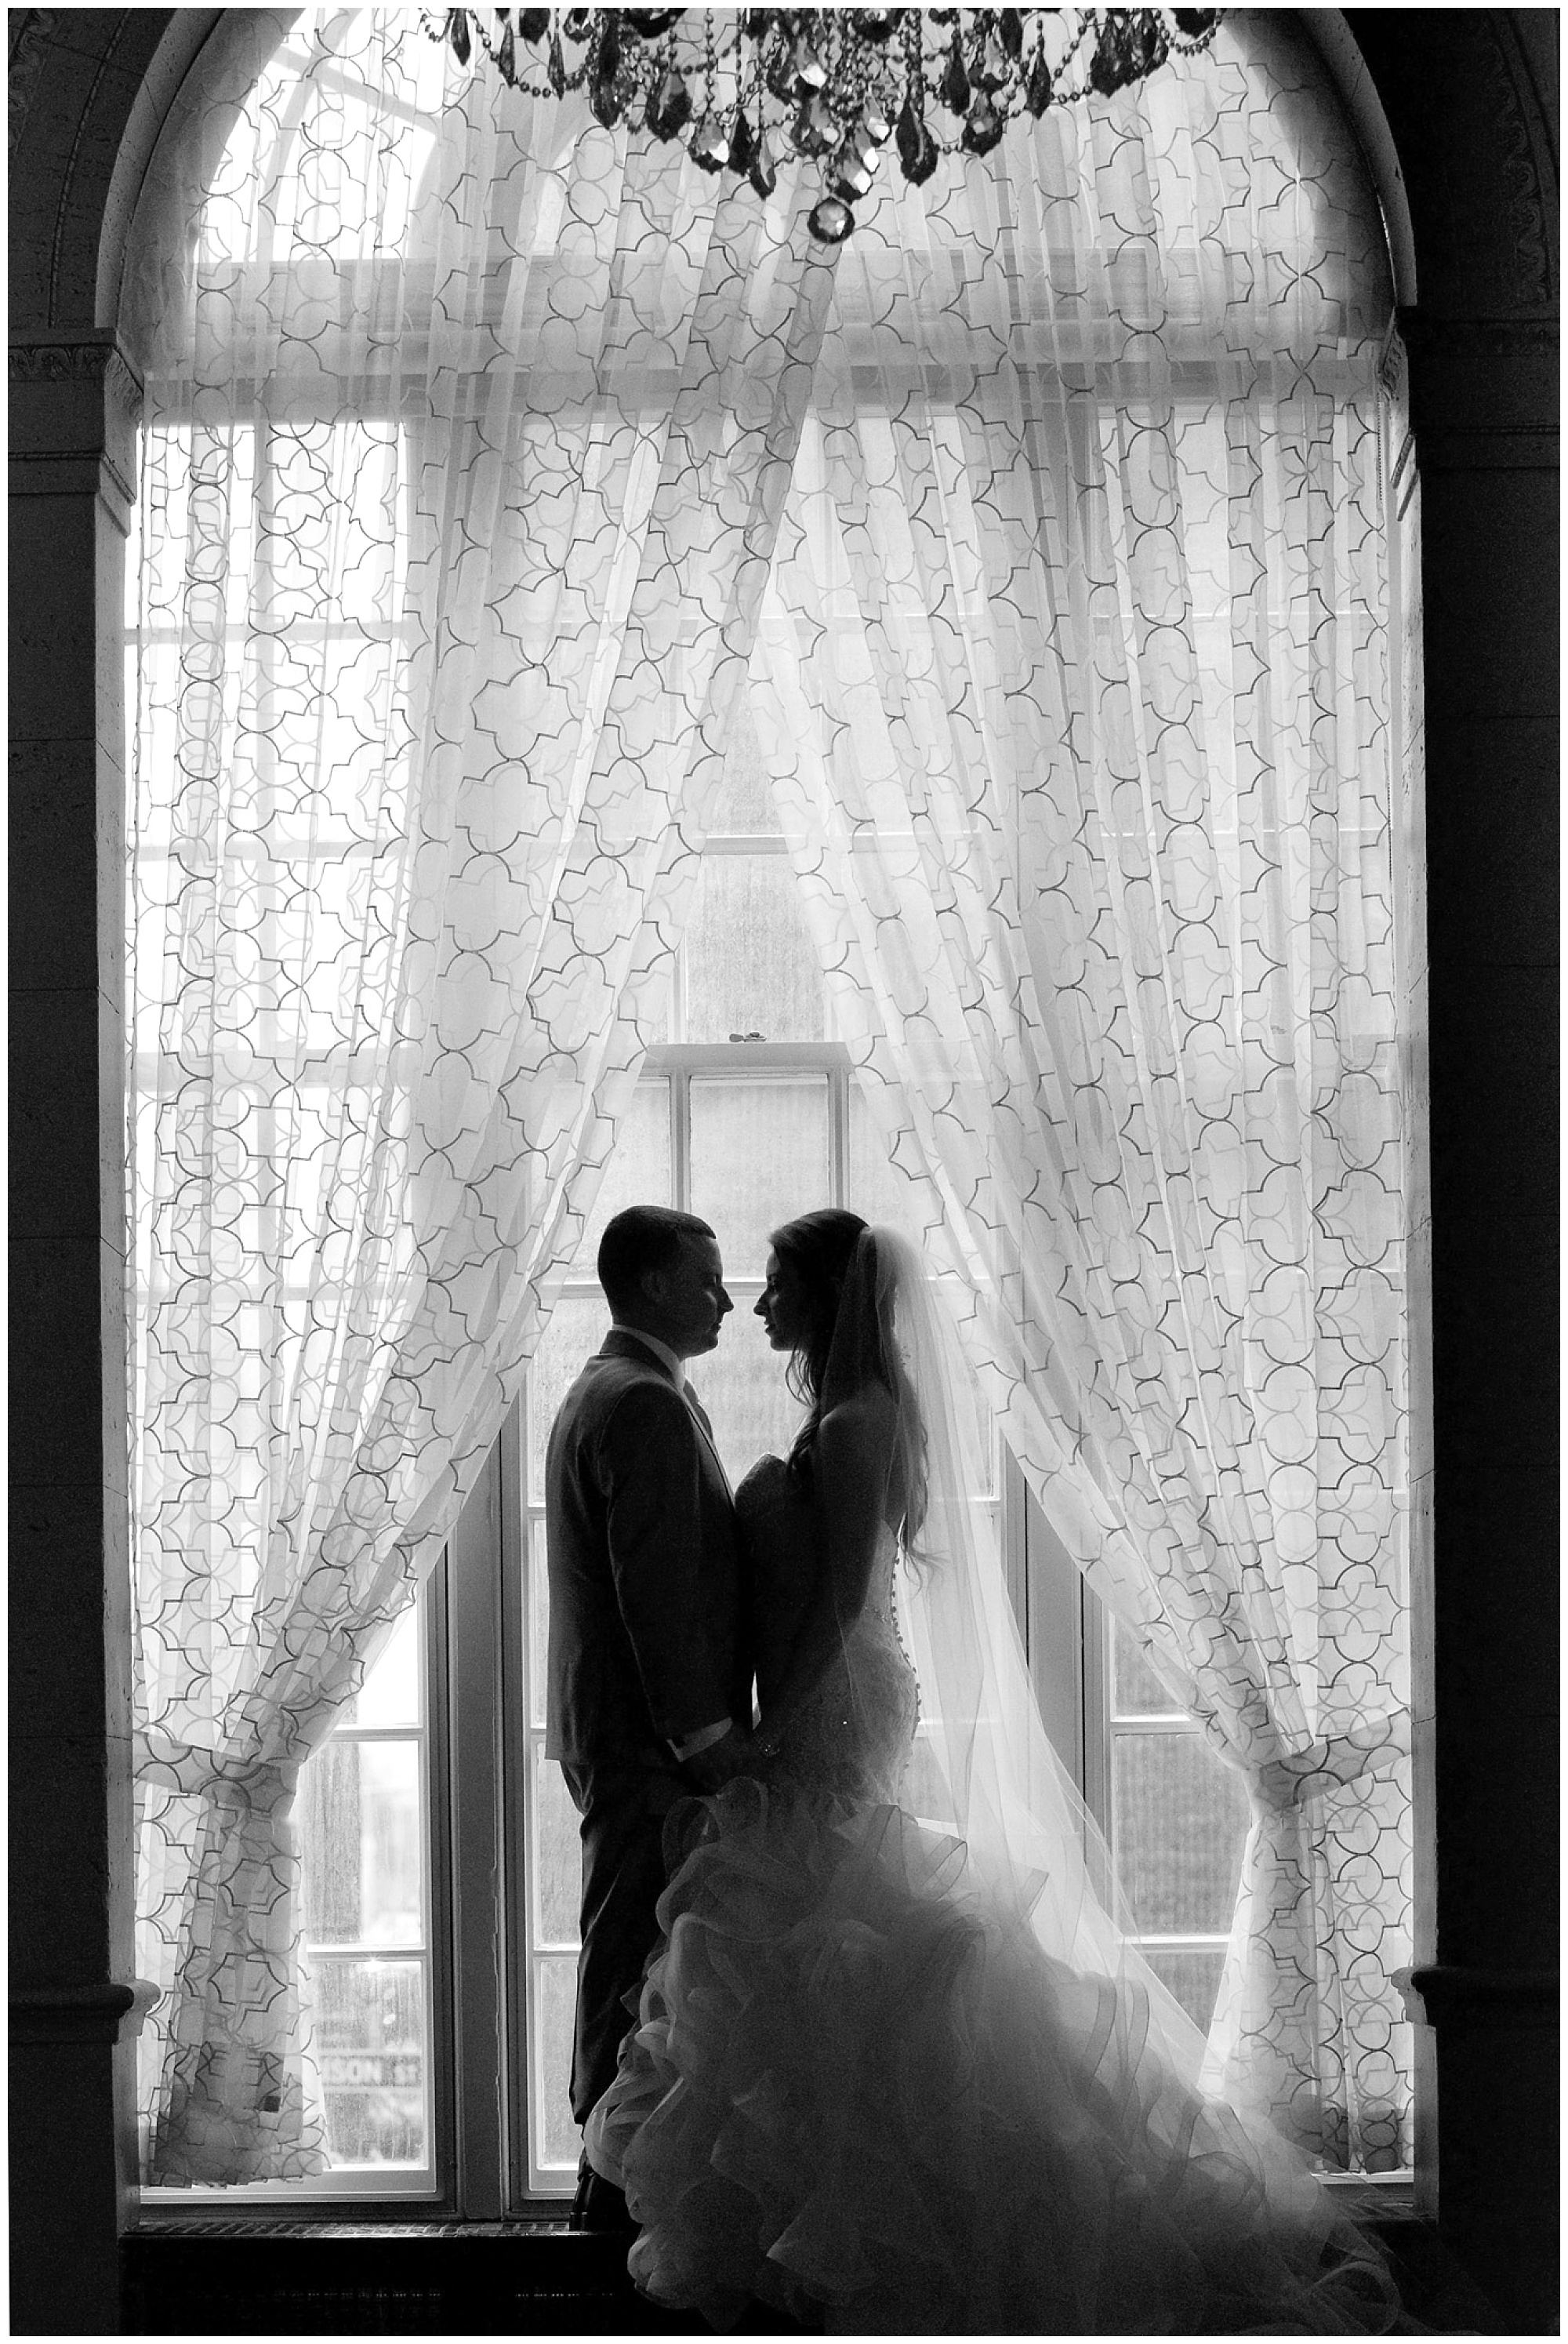 A portrait of a bride and groom semi silhouetted and framed by a large arched window.